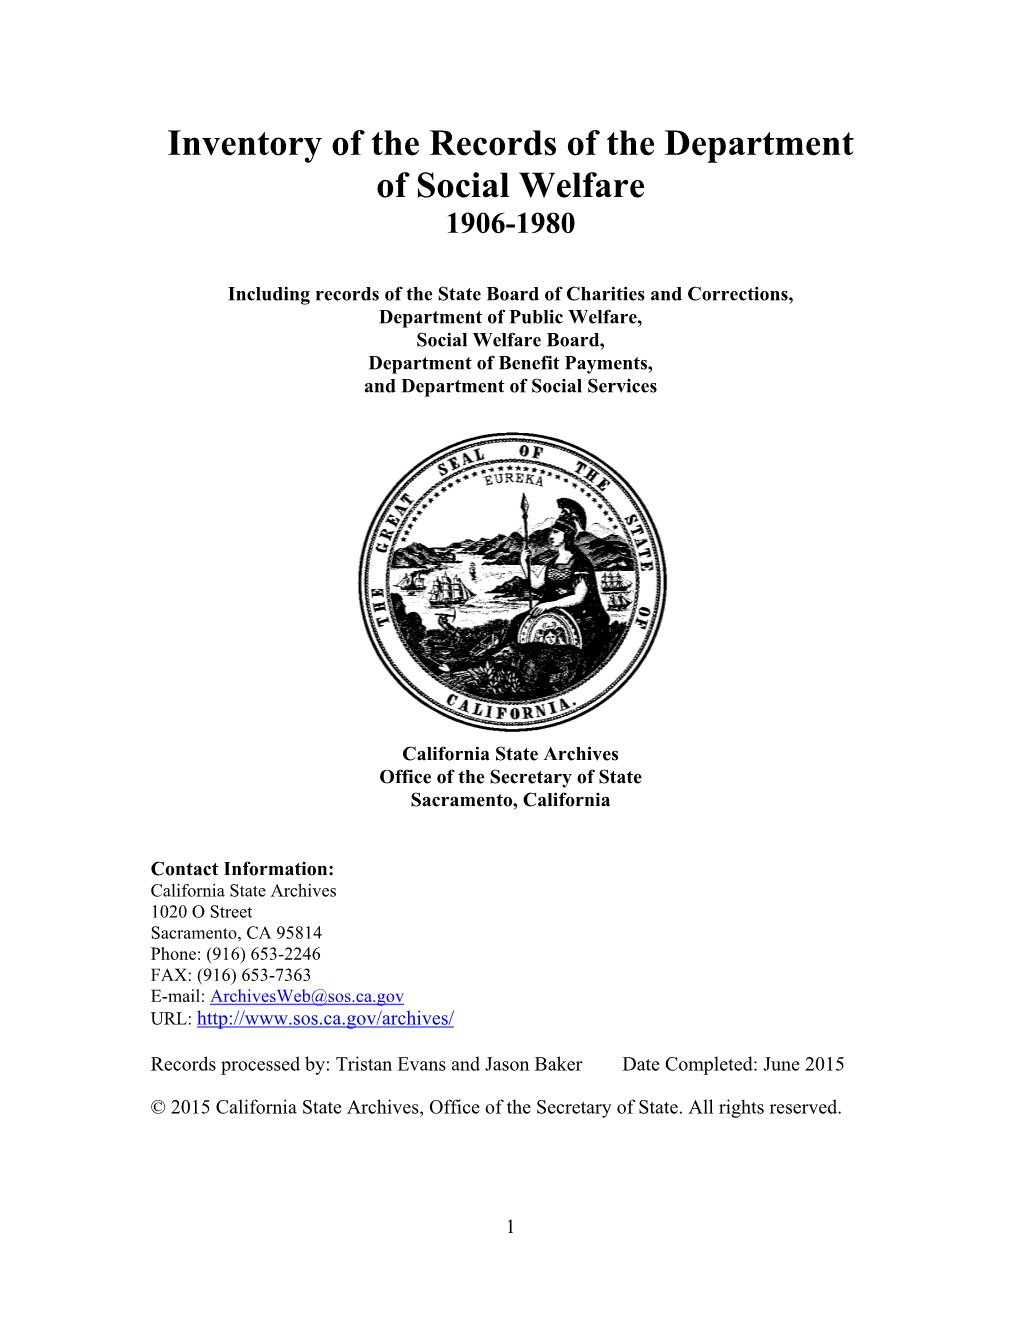 Inventory of the Records of the Department of Social Welfare 1906-1980